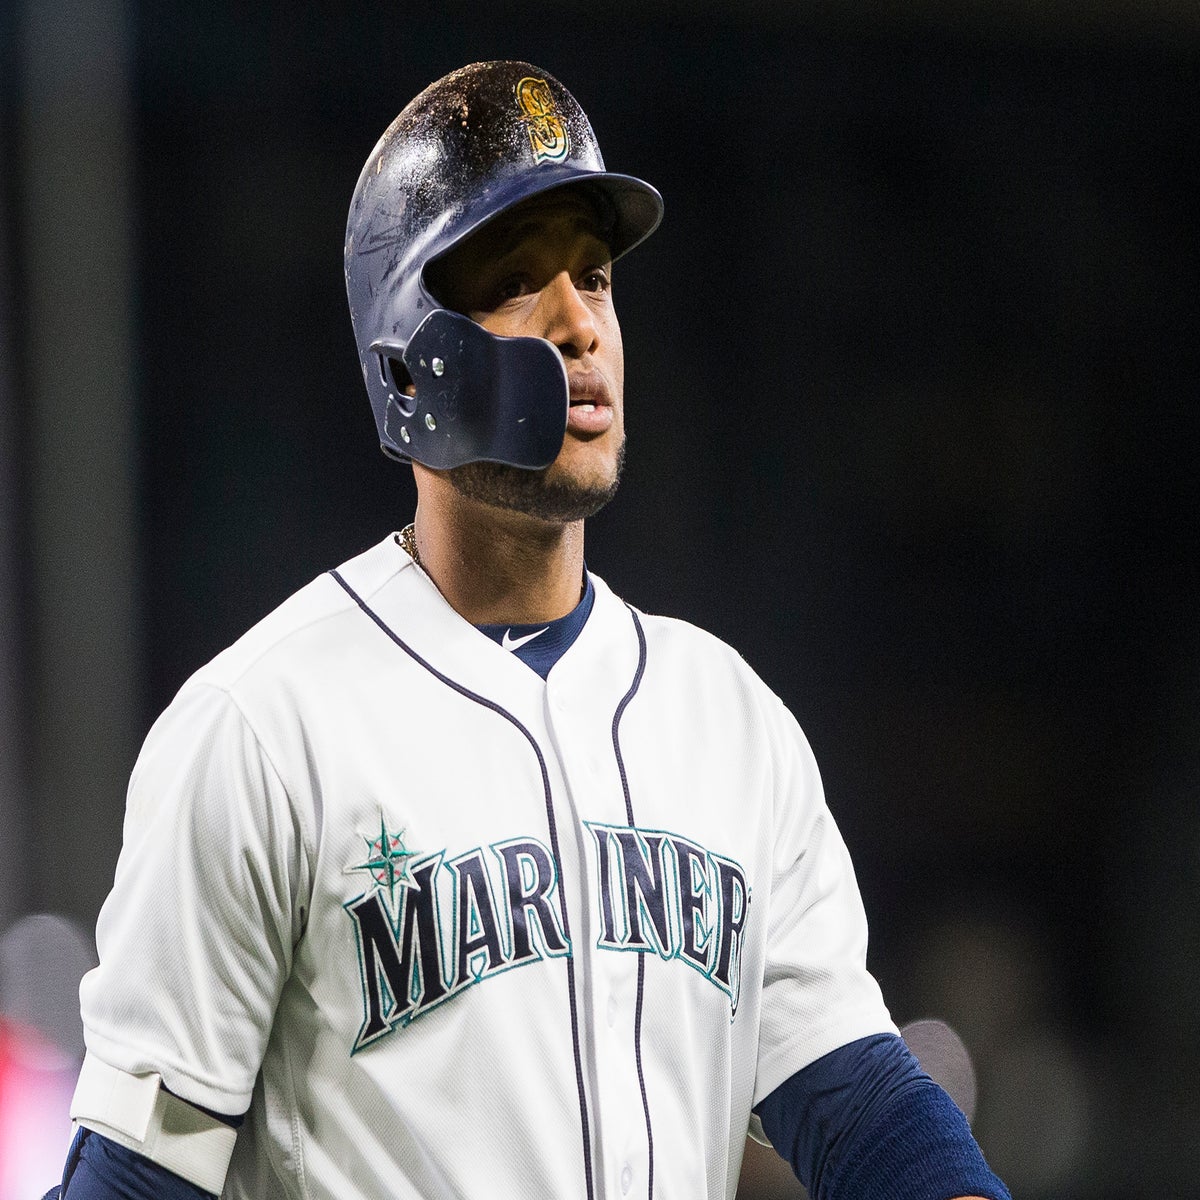 Robinson Cano Follows Clean Diet to Get Game-Ready After Suspension